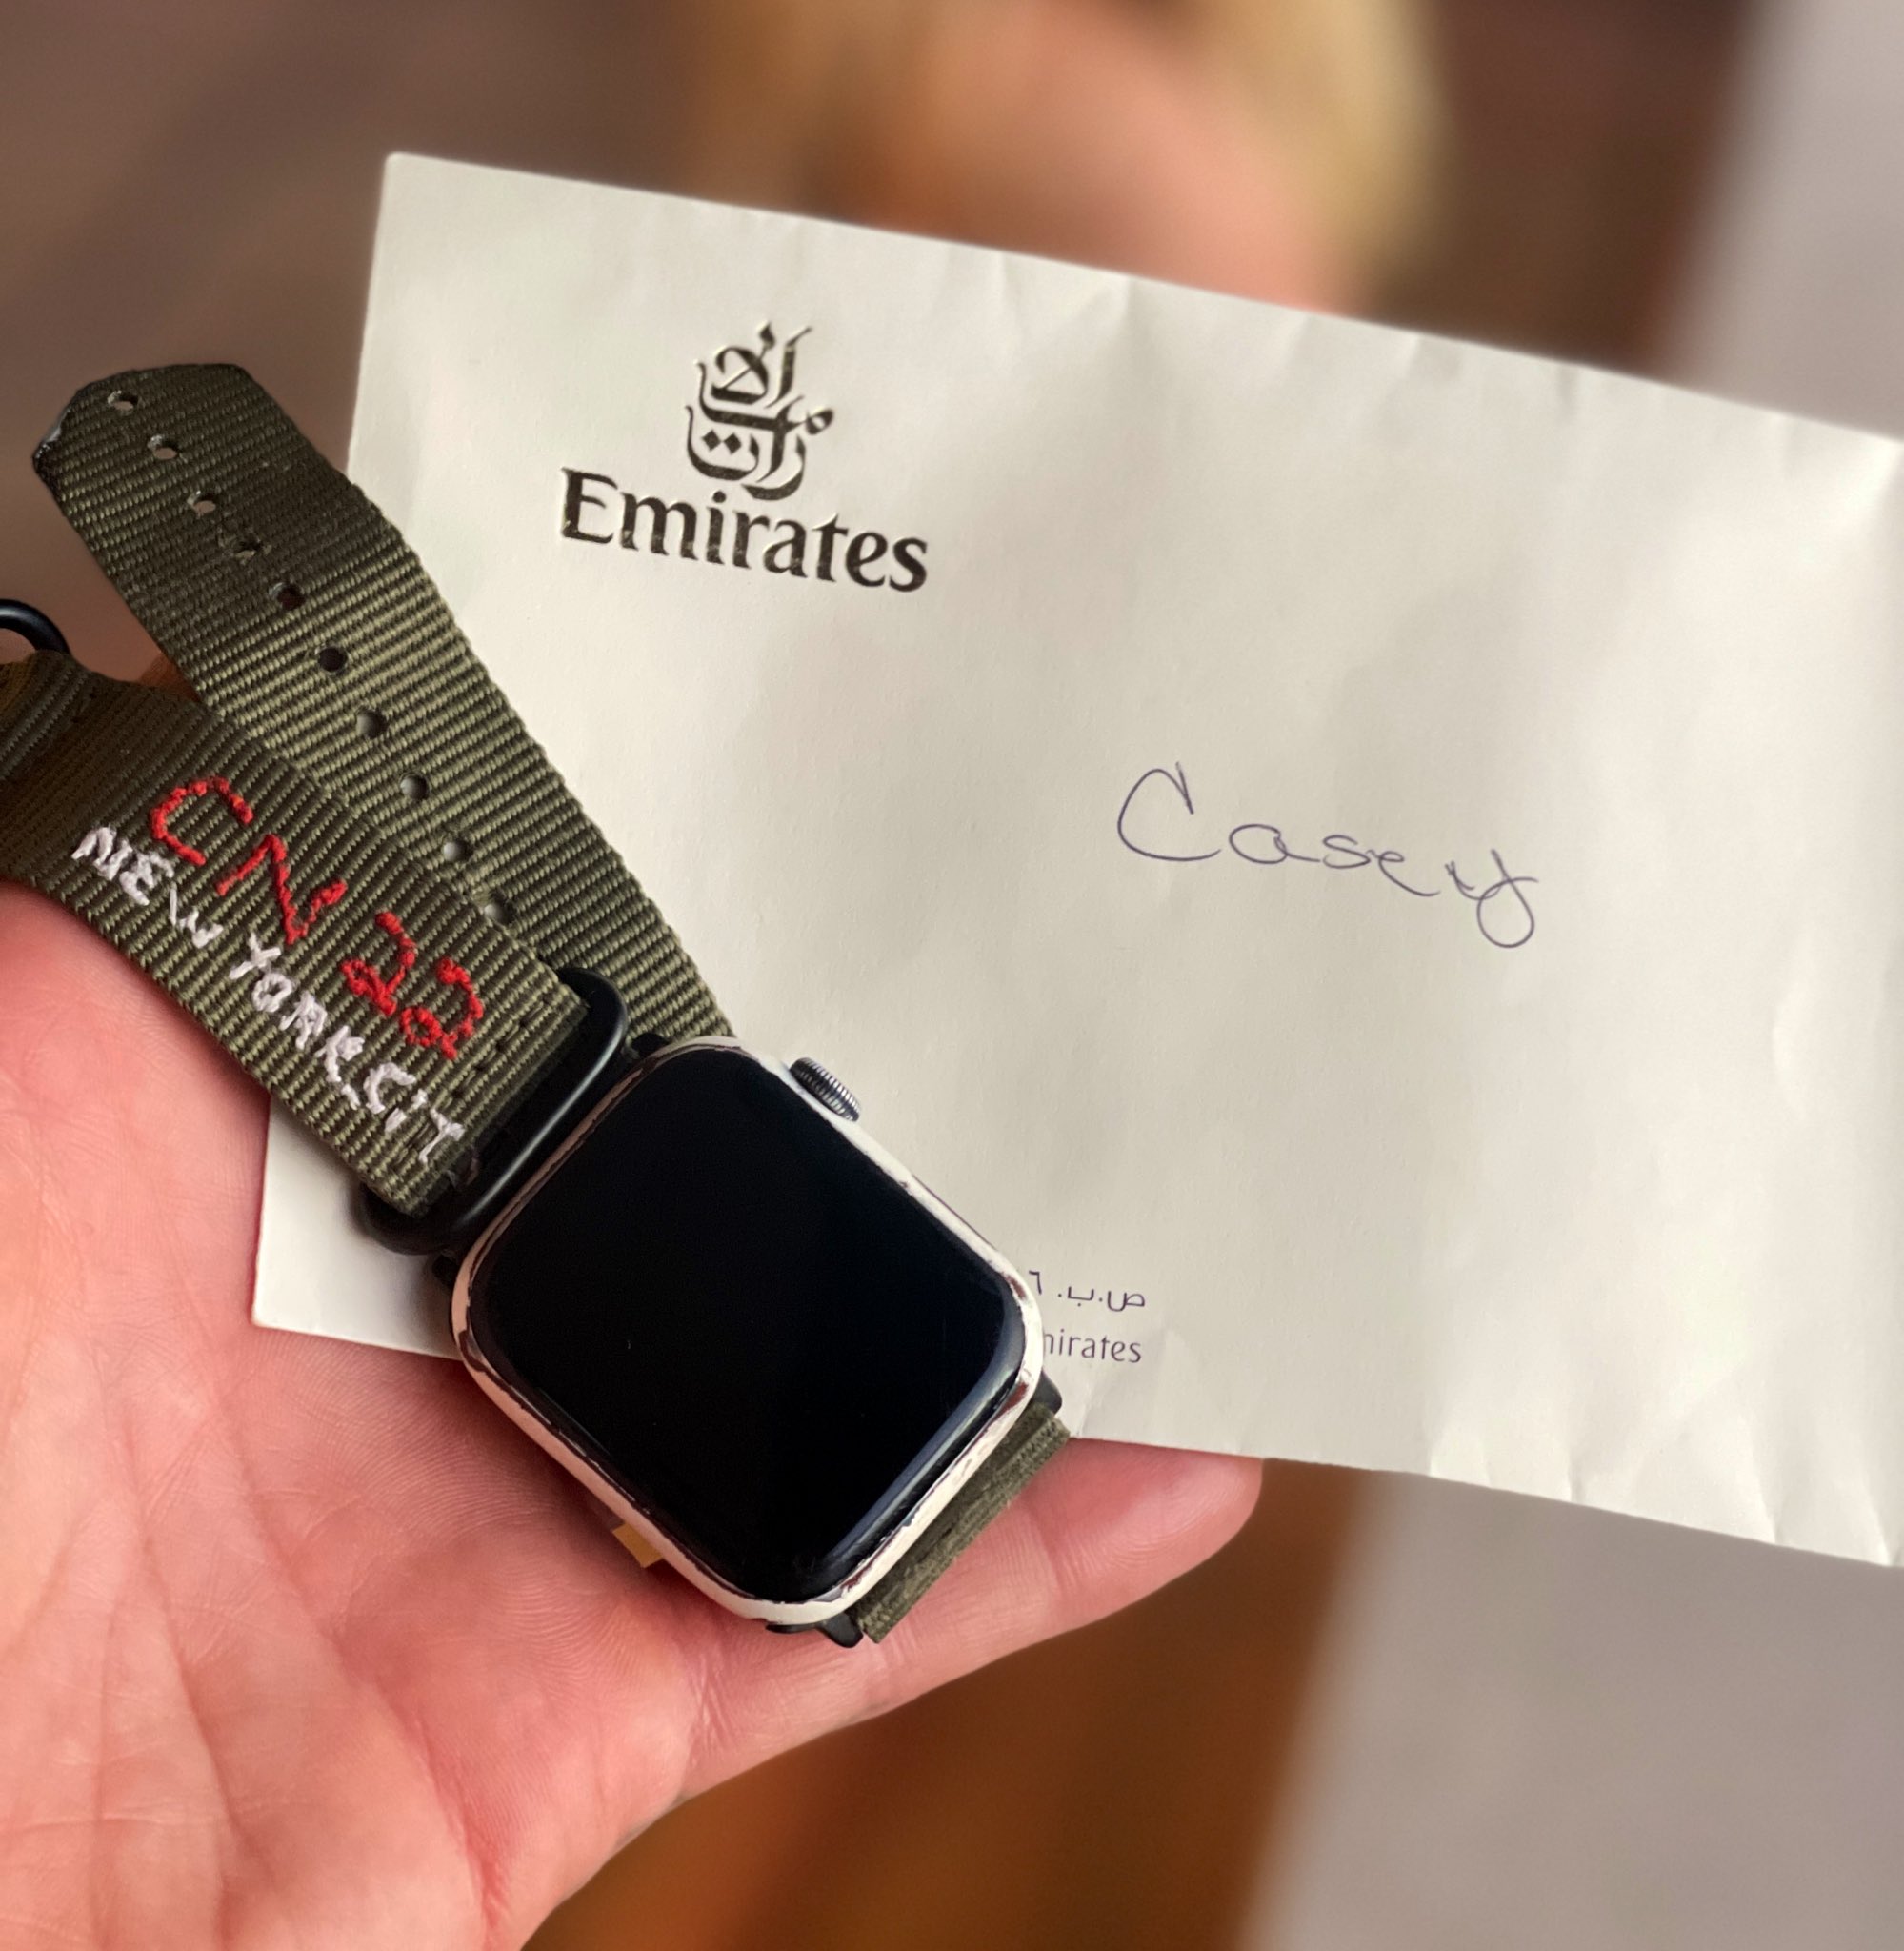 Casey Neistat on X: 3 days ago i left my apple watch at security